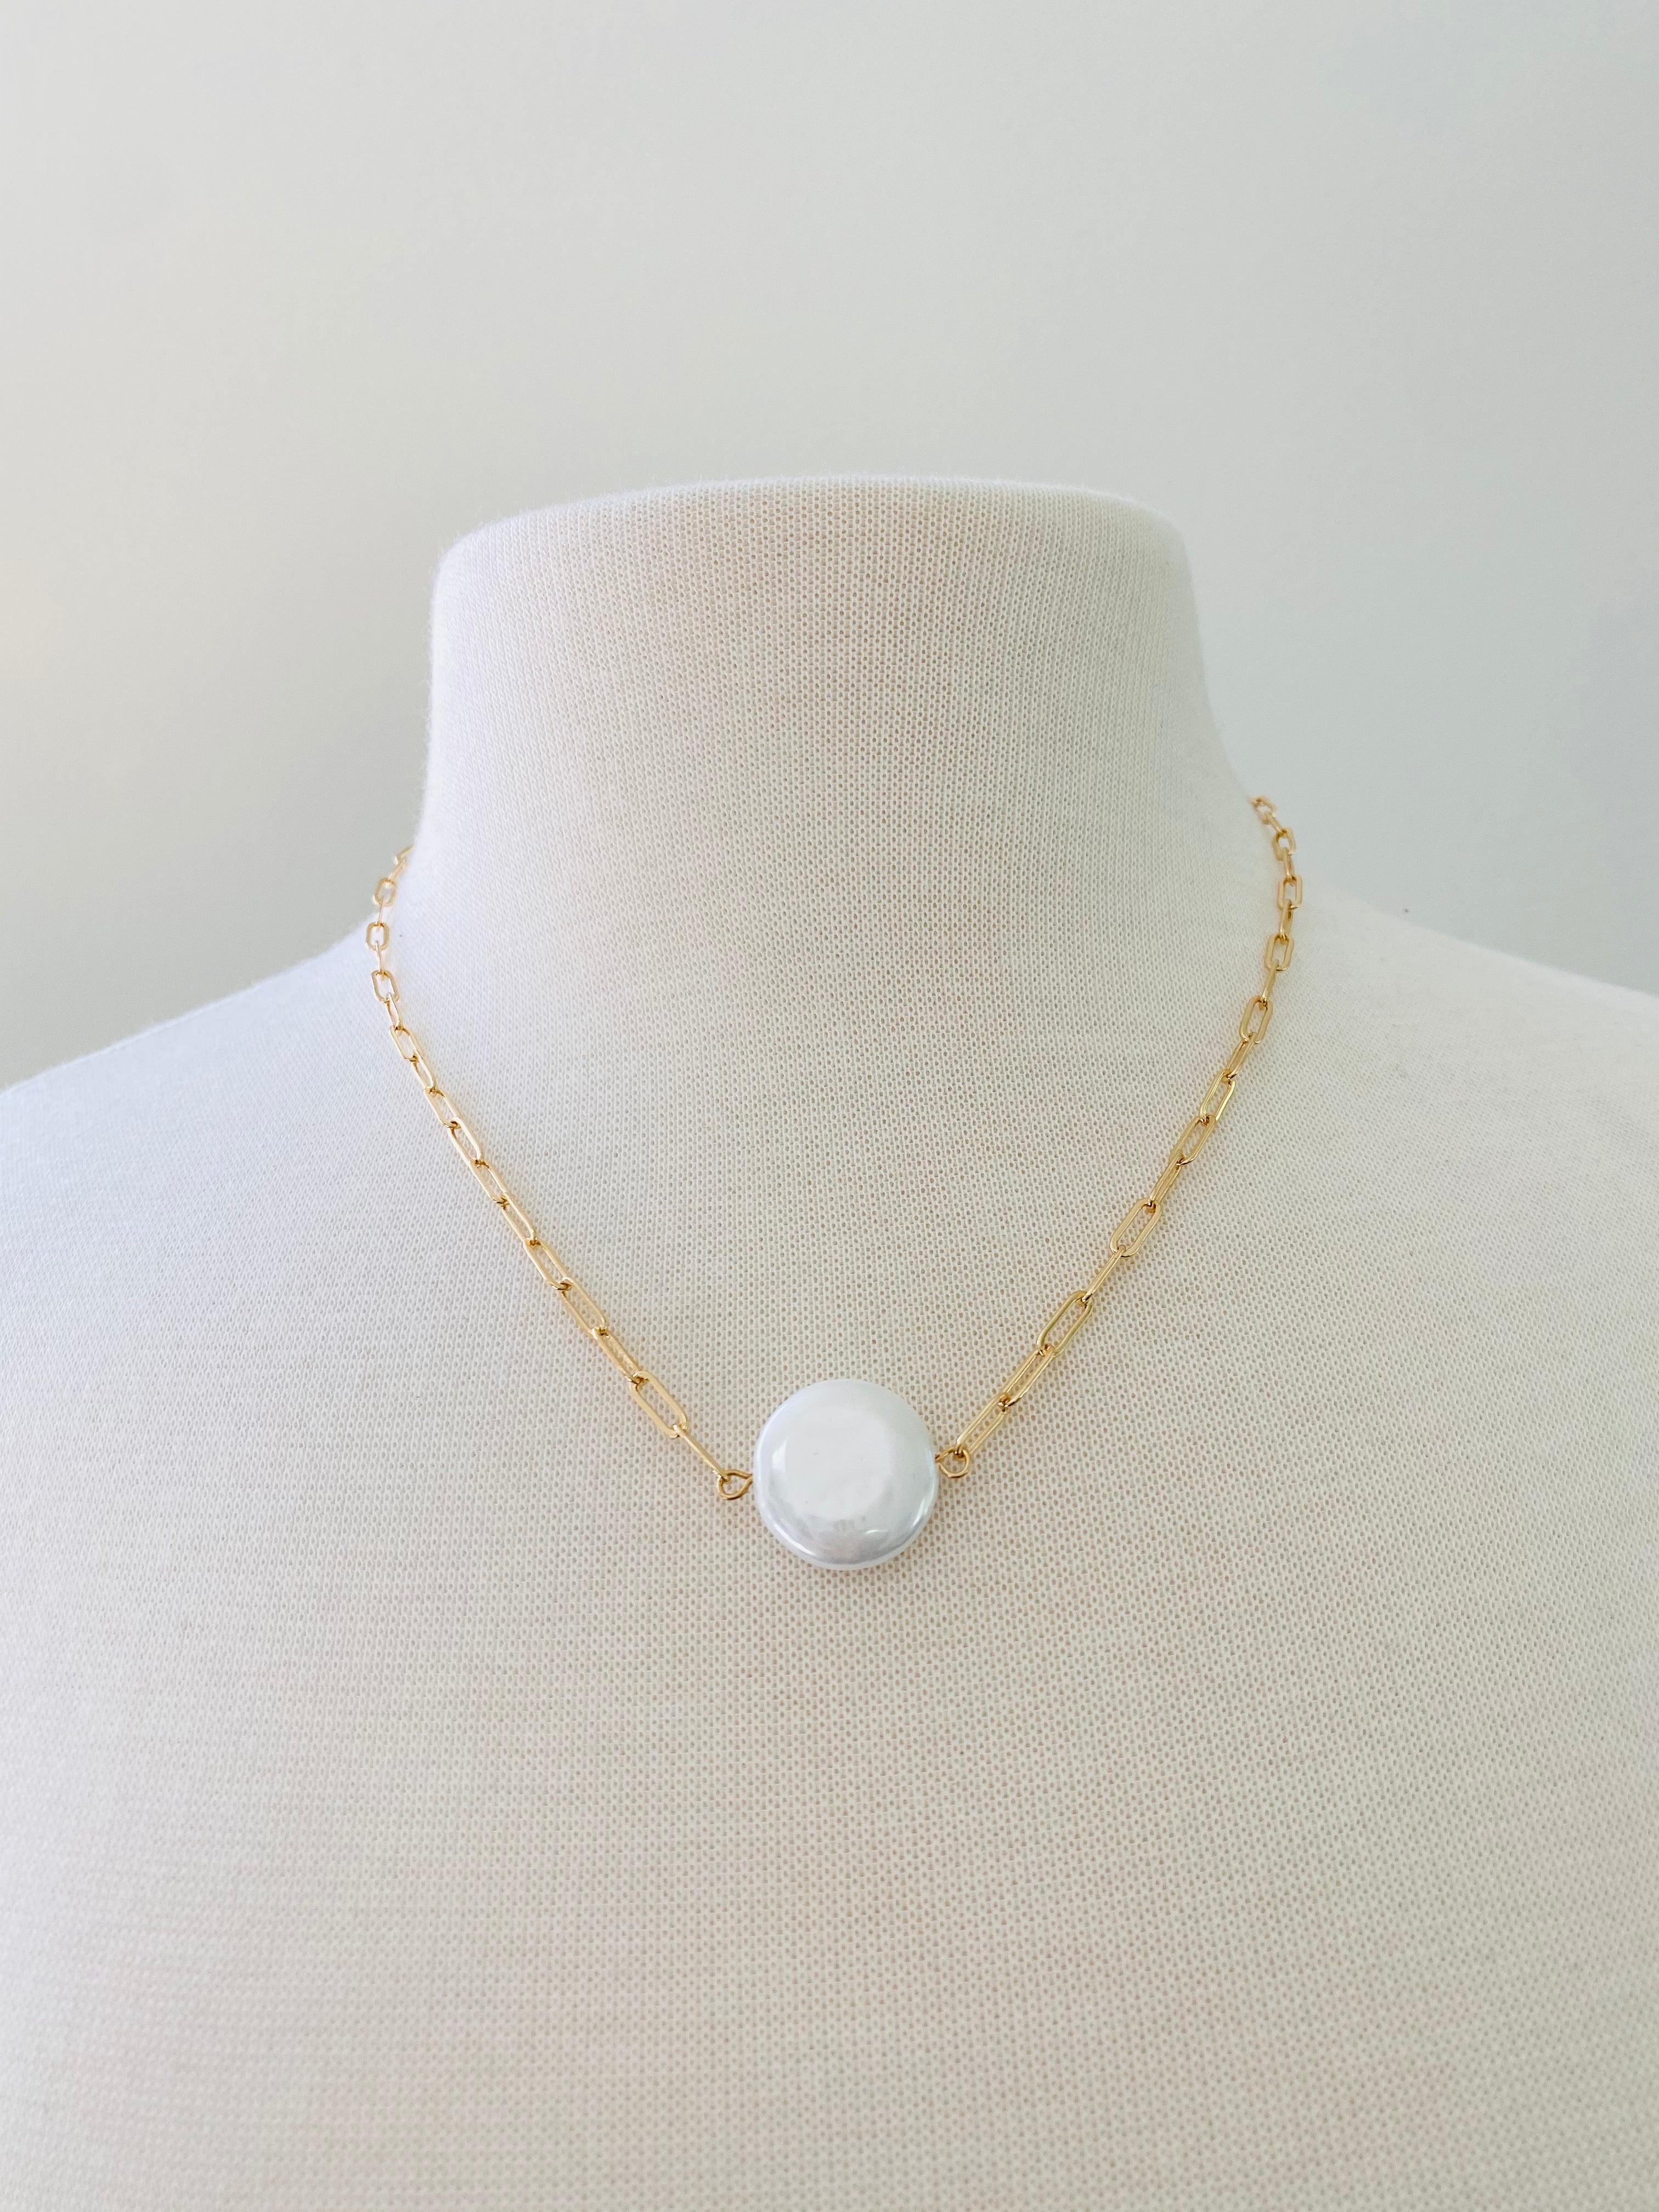 NL59 COIN FRESH WATER PEARL NECKLACE